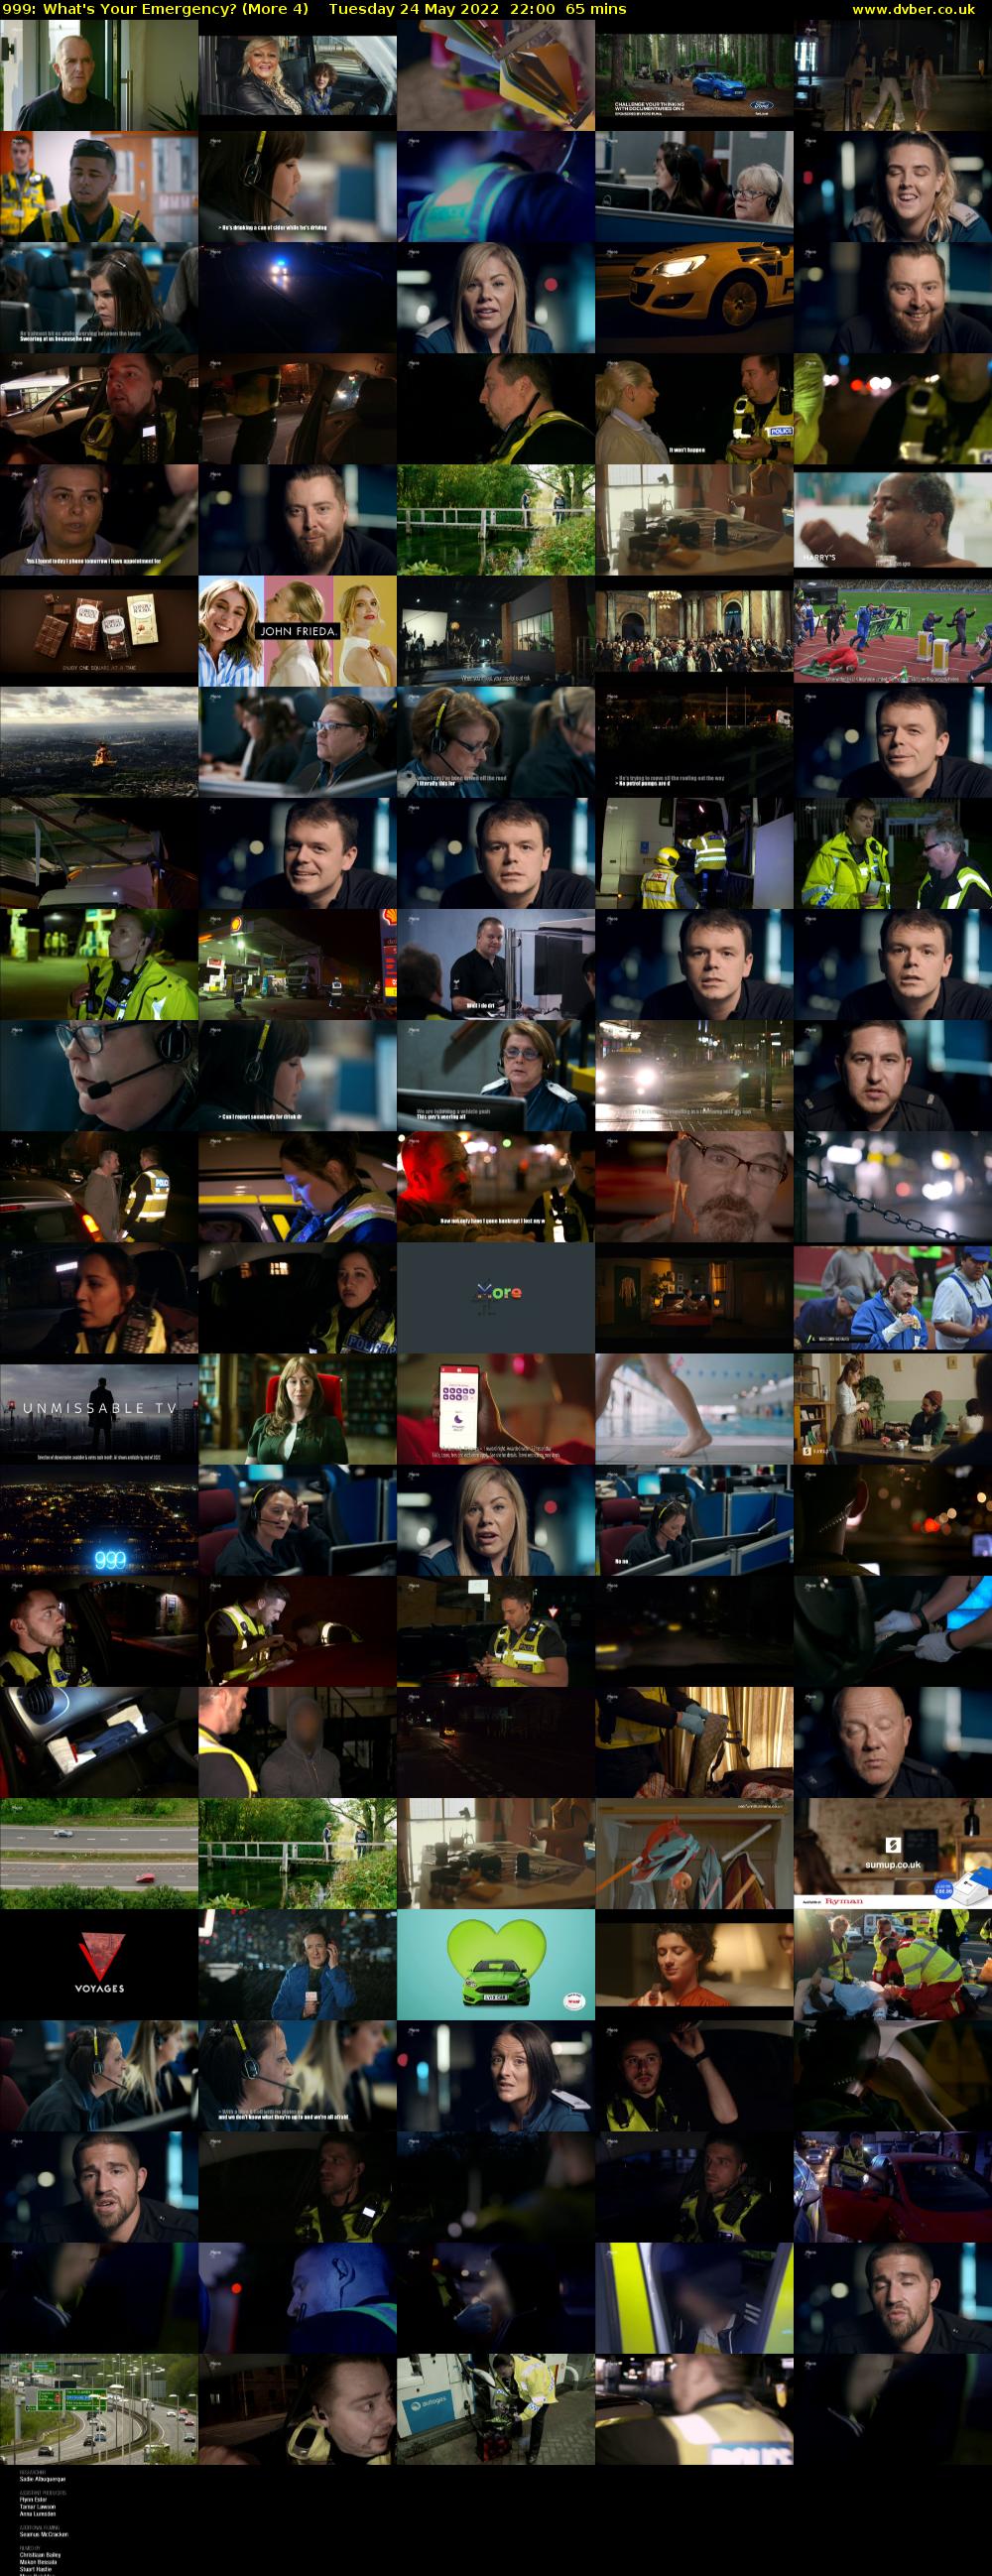 999: What's Your Emergency? (More 4) Tuesday 24 May 2022 22:00 - 23:05